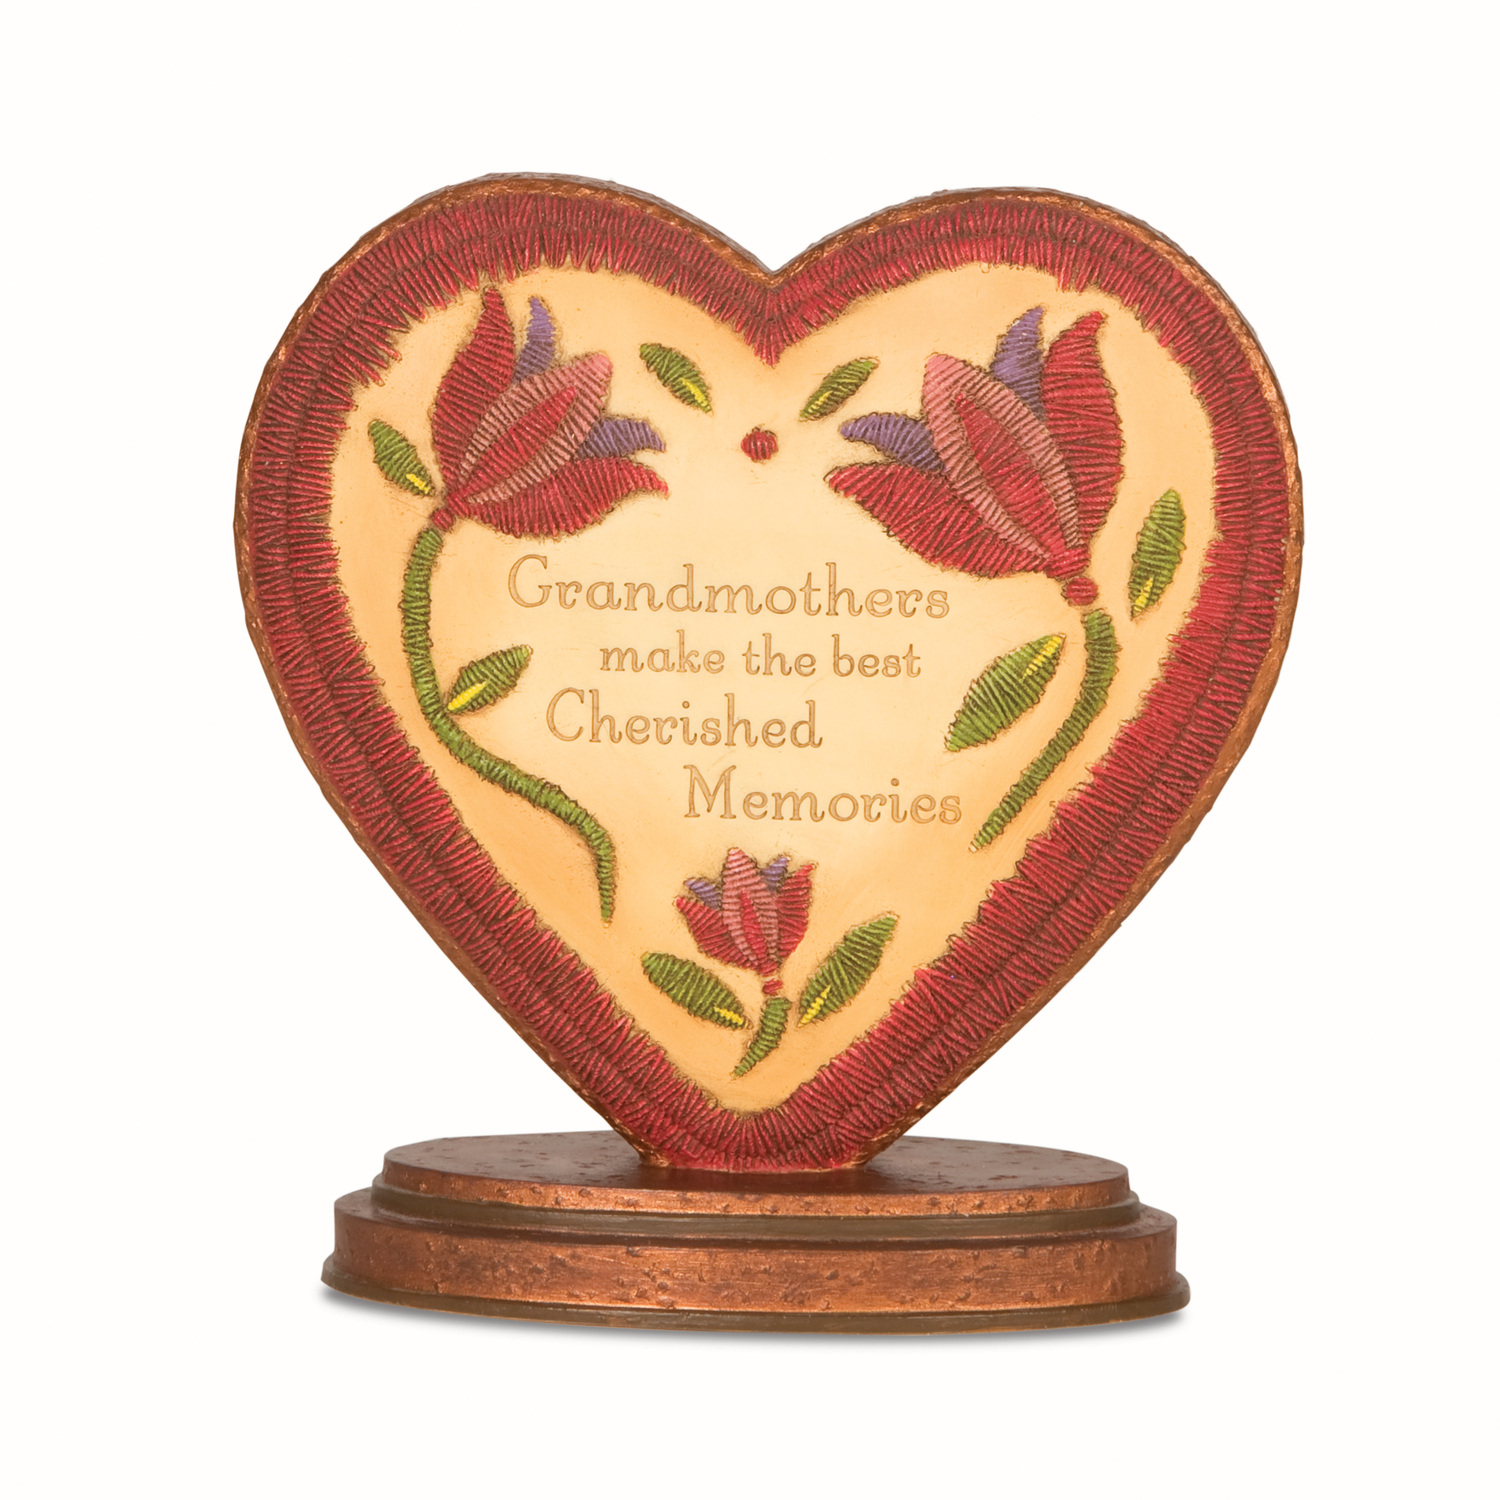 Cherished Memories by Country Soul - Cherished Memories - 4.5" x 4.5" Heart Plaque